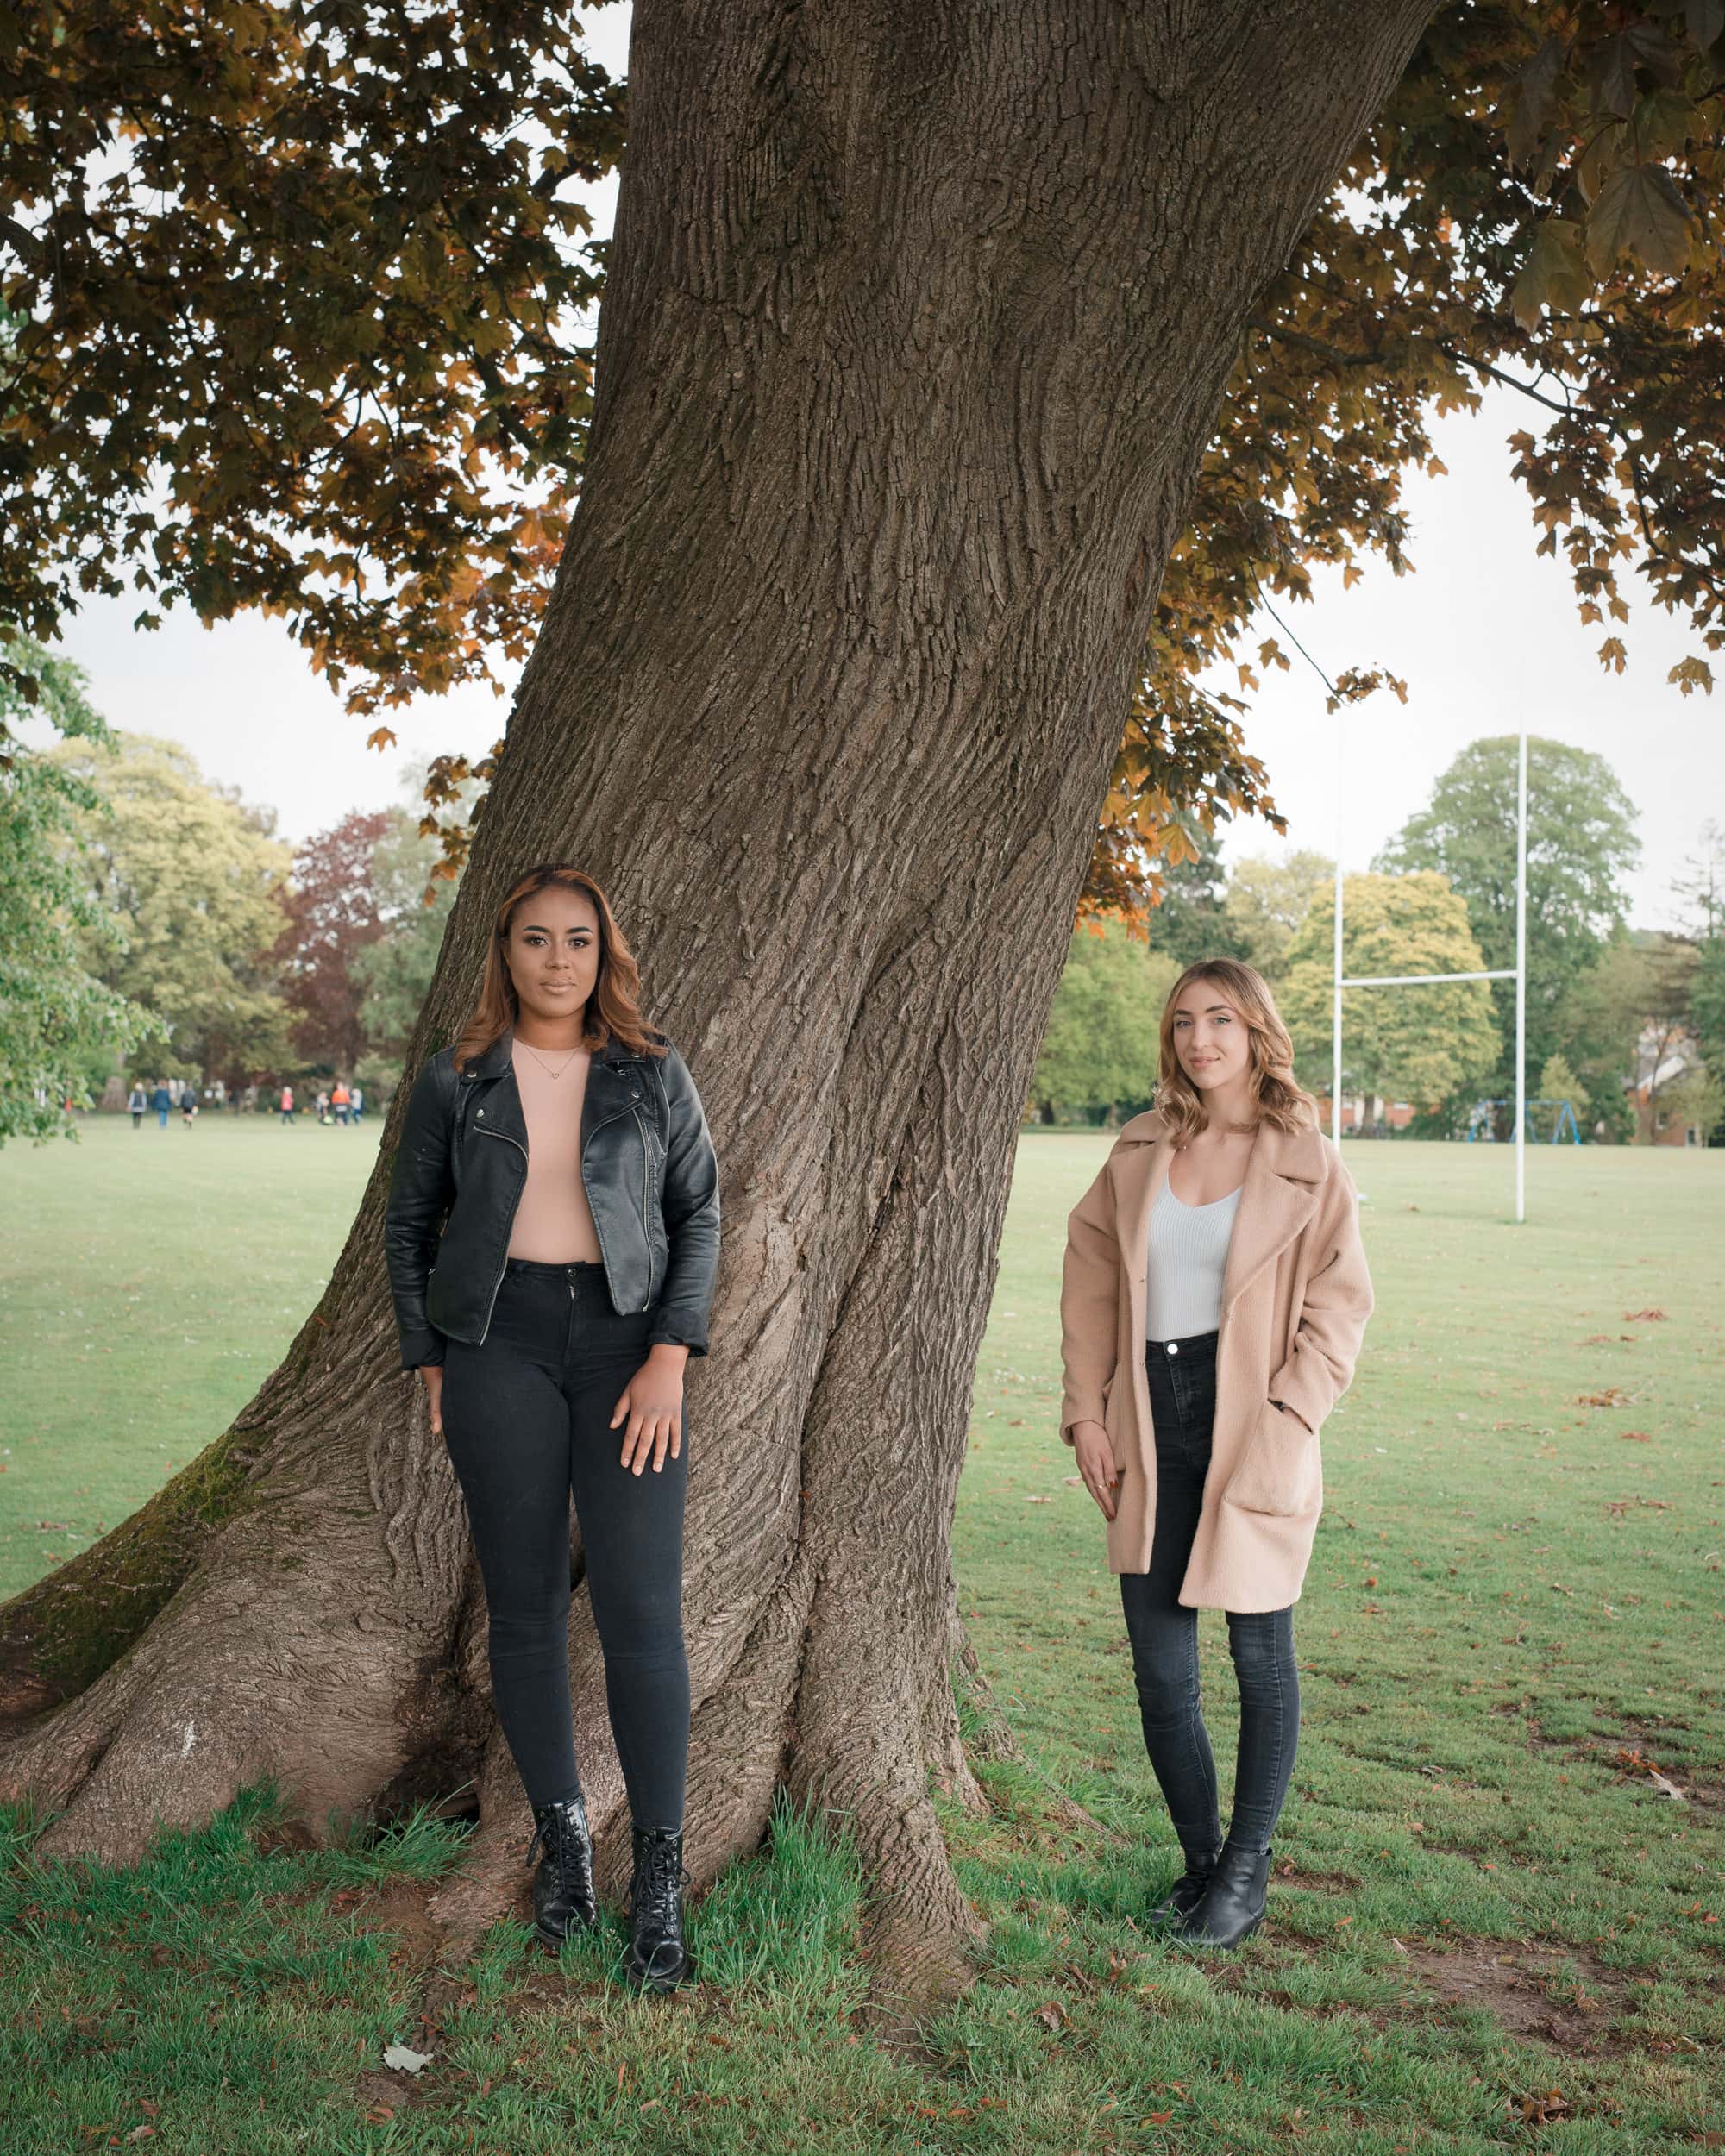 khady gueye and eleni eldridge-tull photographed in Lydney, Forest of Dean for the observer. They organised a BLM event in June 2020 at Bathurst park